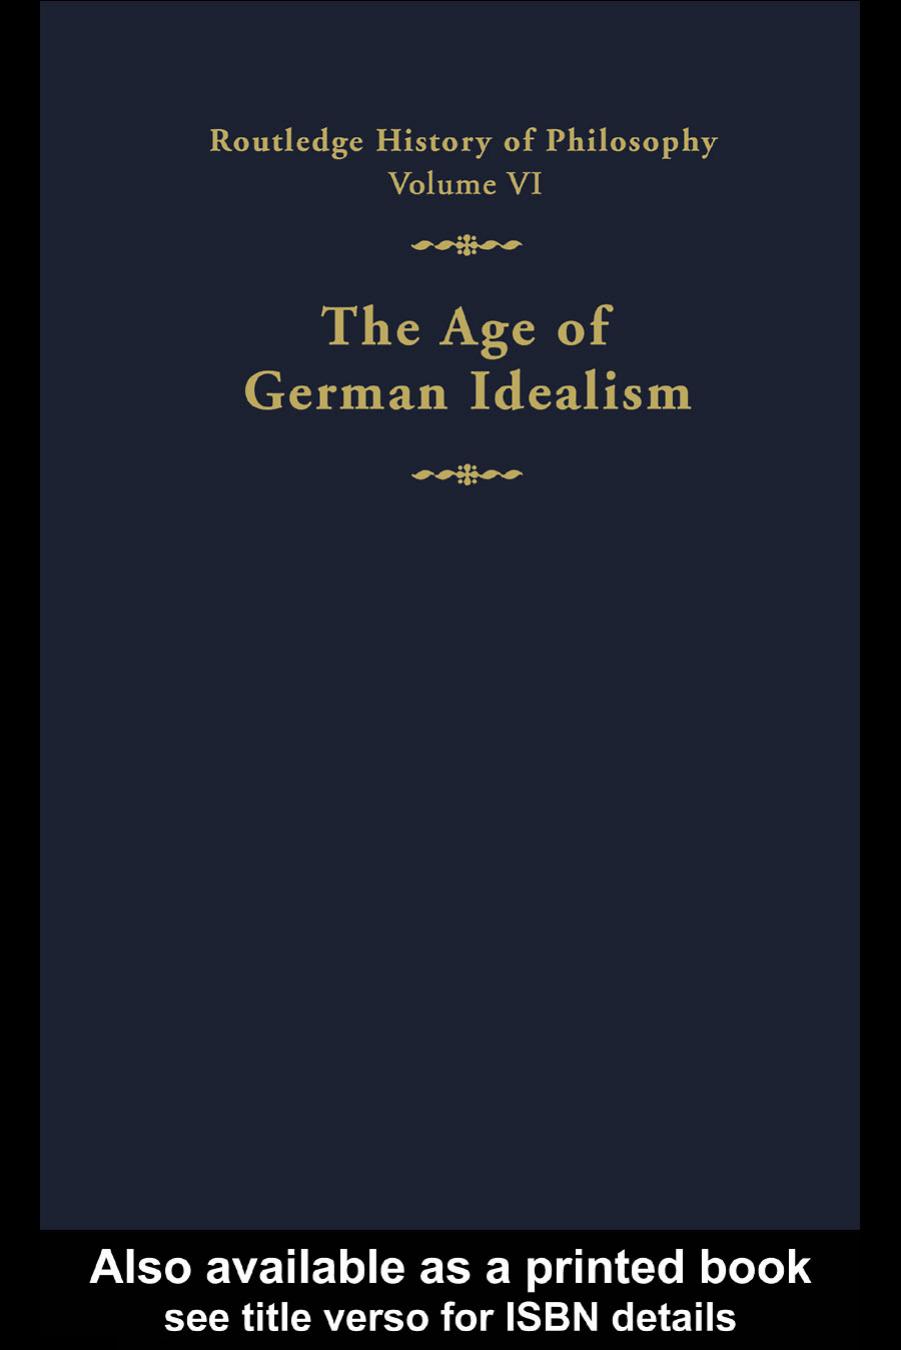 The Age of German Idealism: Routledge History of Philosophy